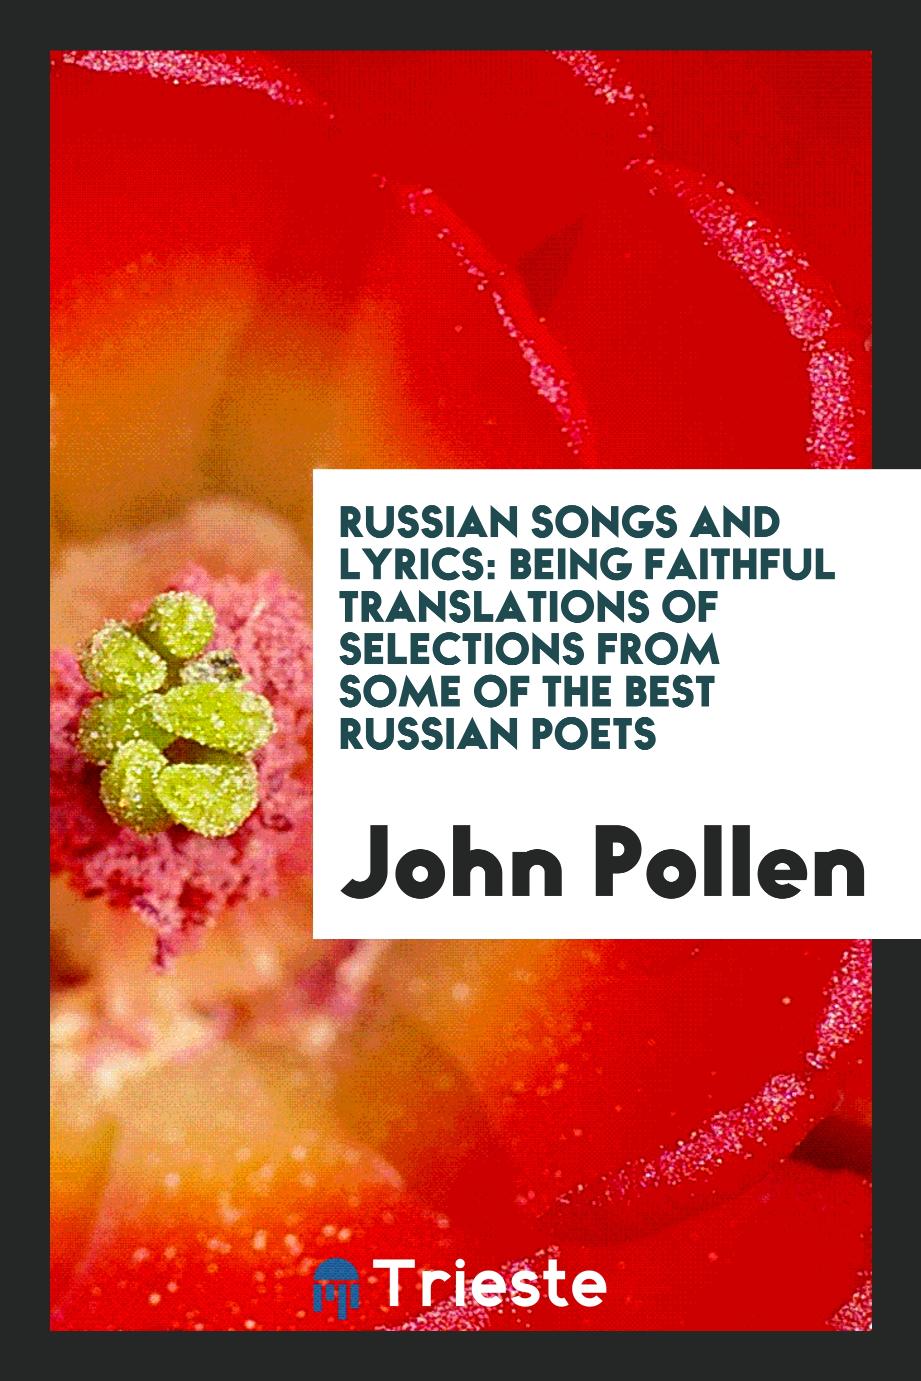 Russian songs and lyrics: being faithful translations of selections from some of the best Russian poets